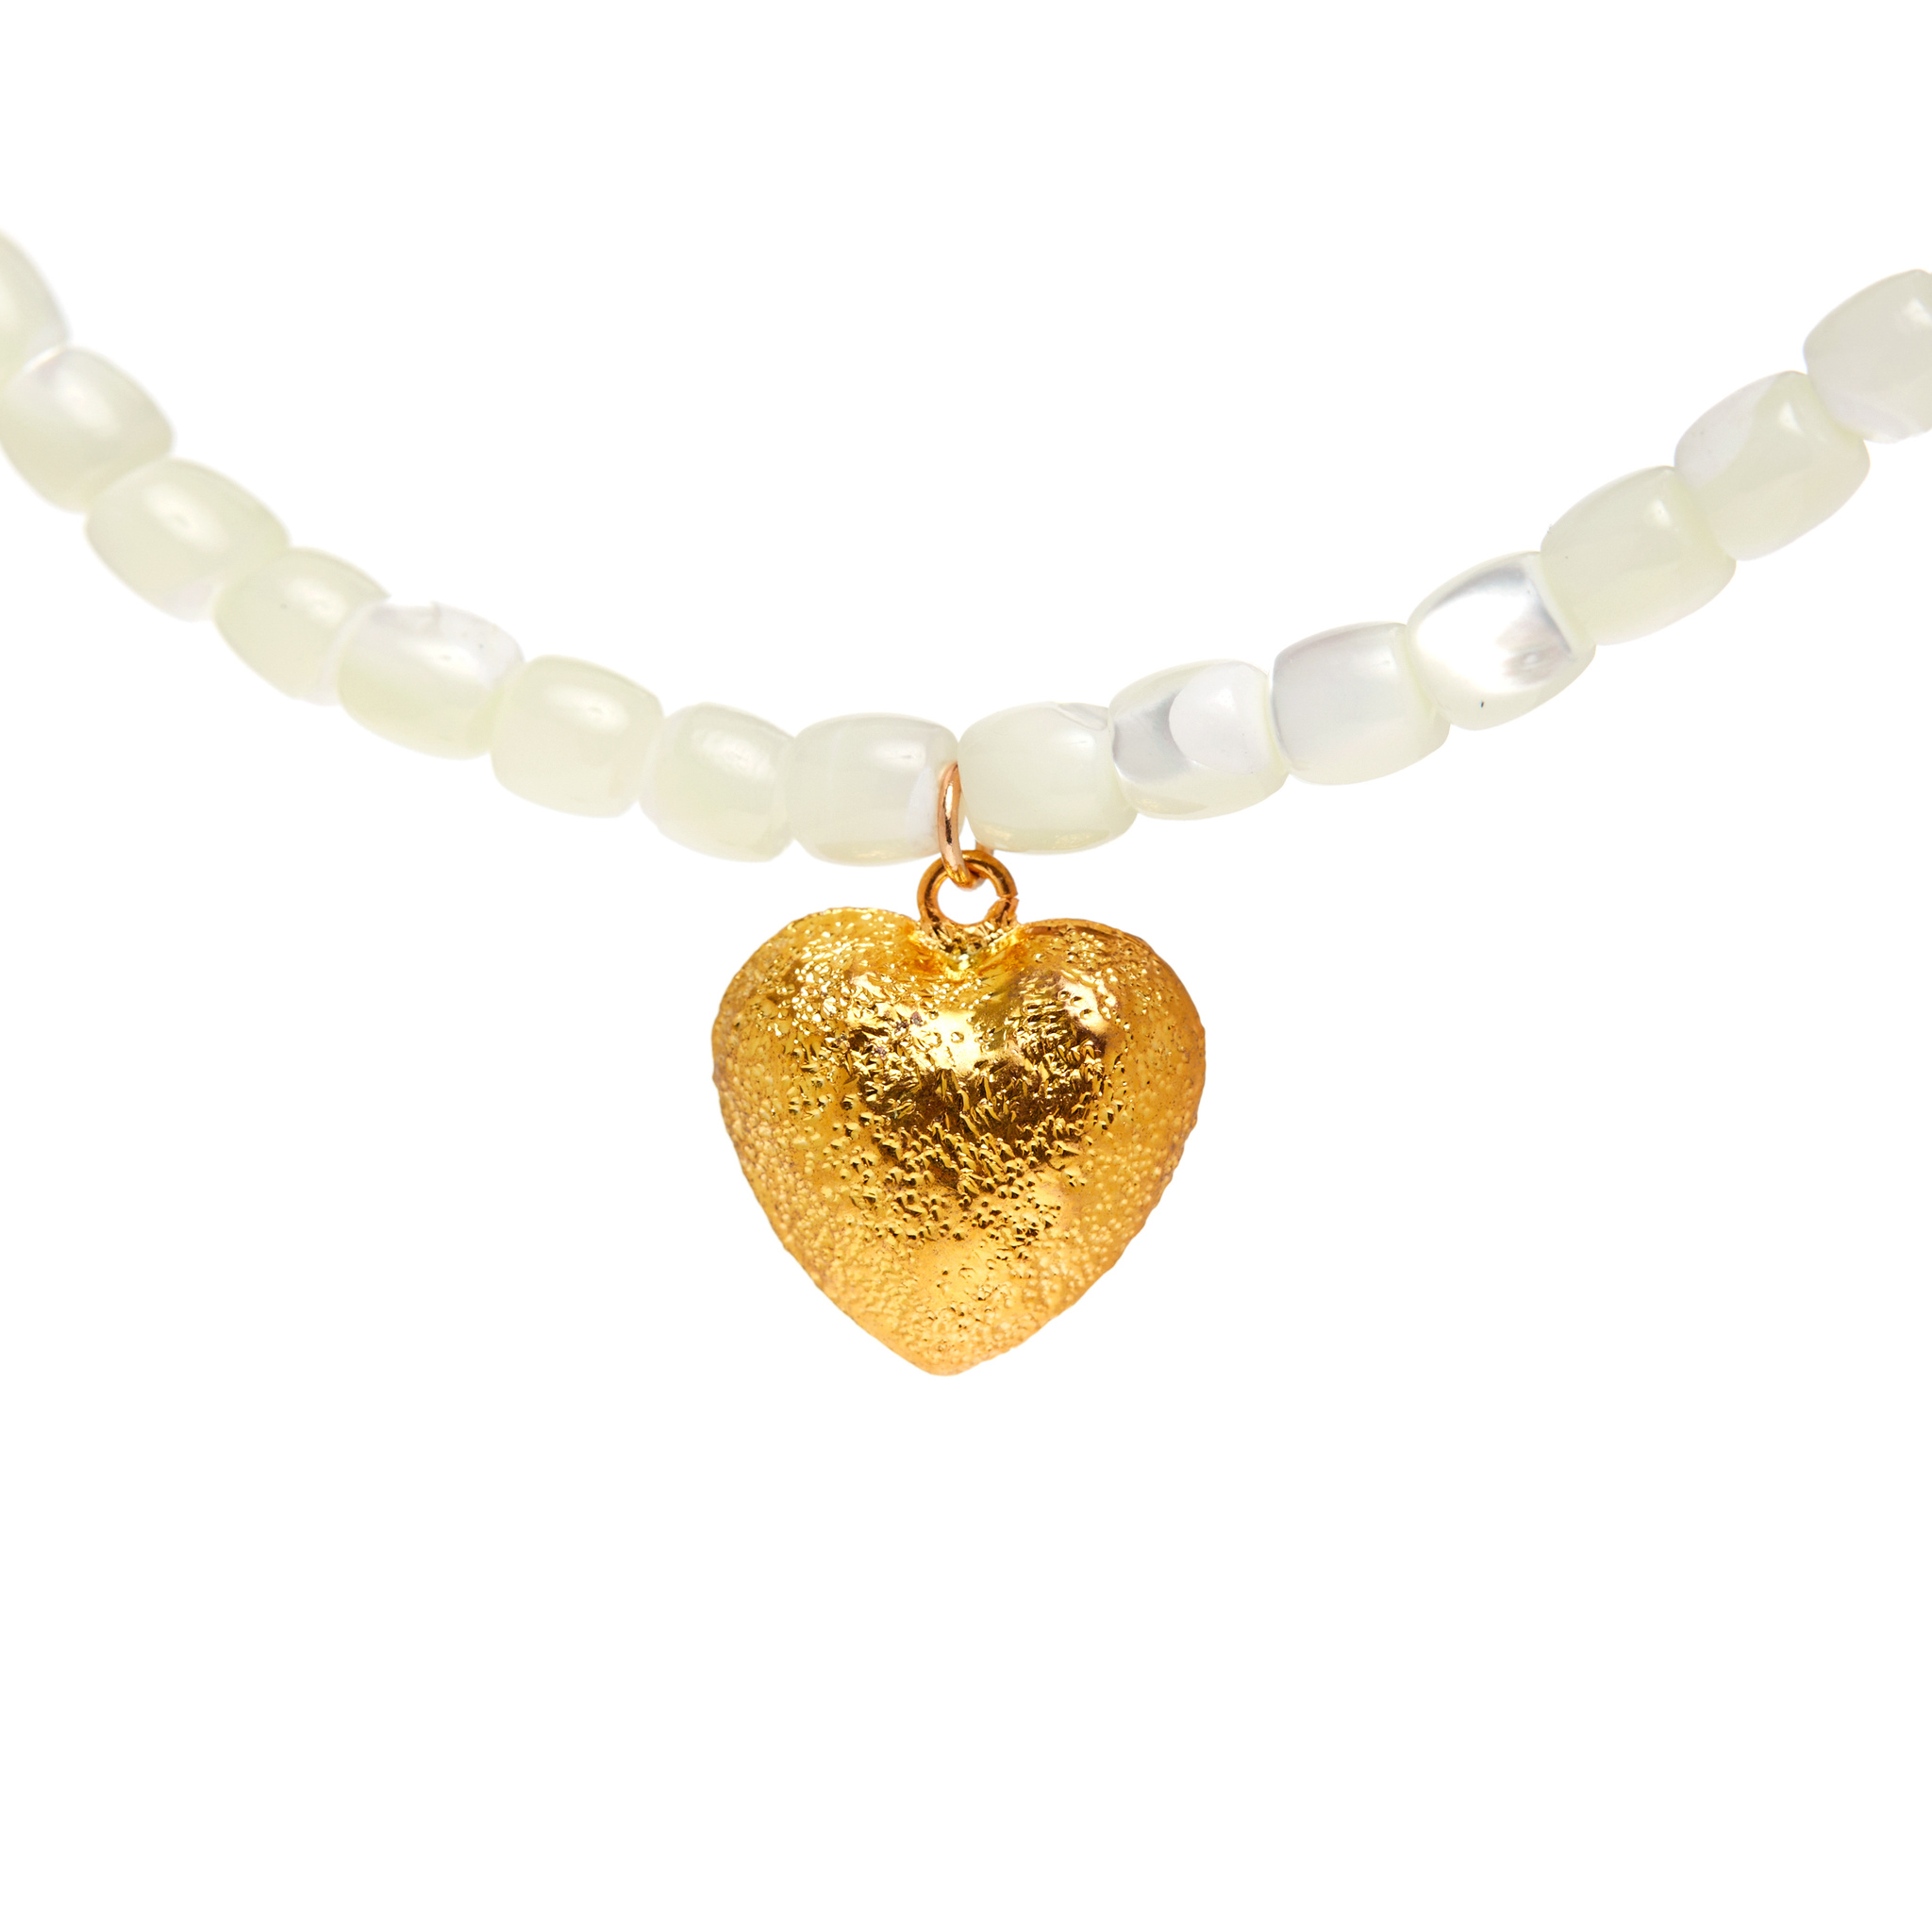 HOLLY JUNE Колье Beads And Gold Heart Necklace колье holly june gold saturn necklace 1 шт